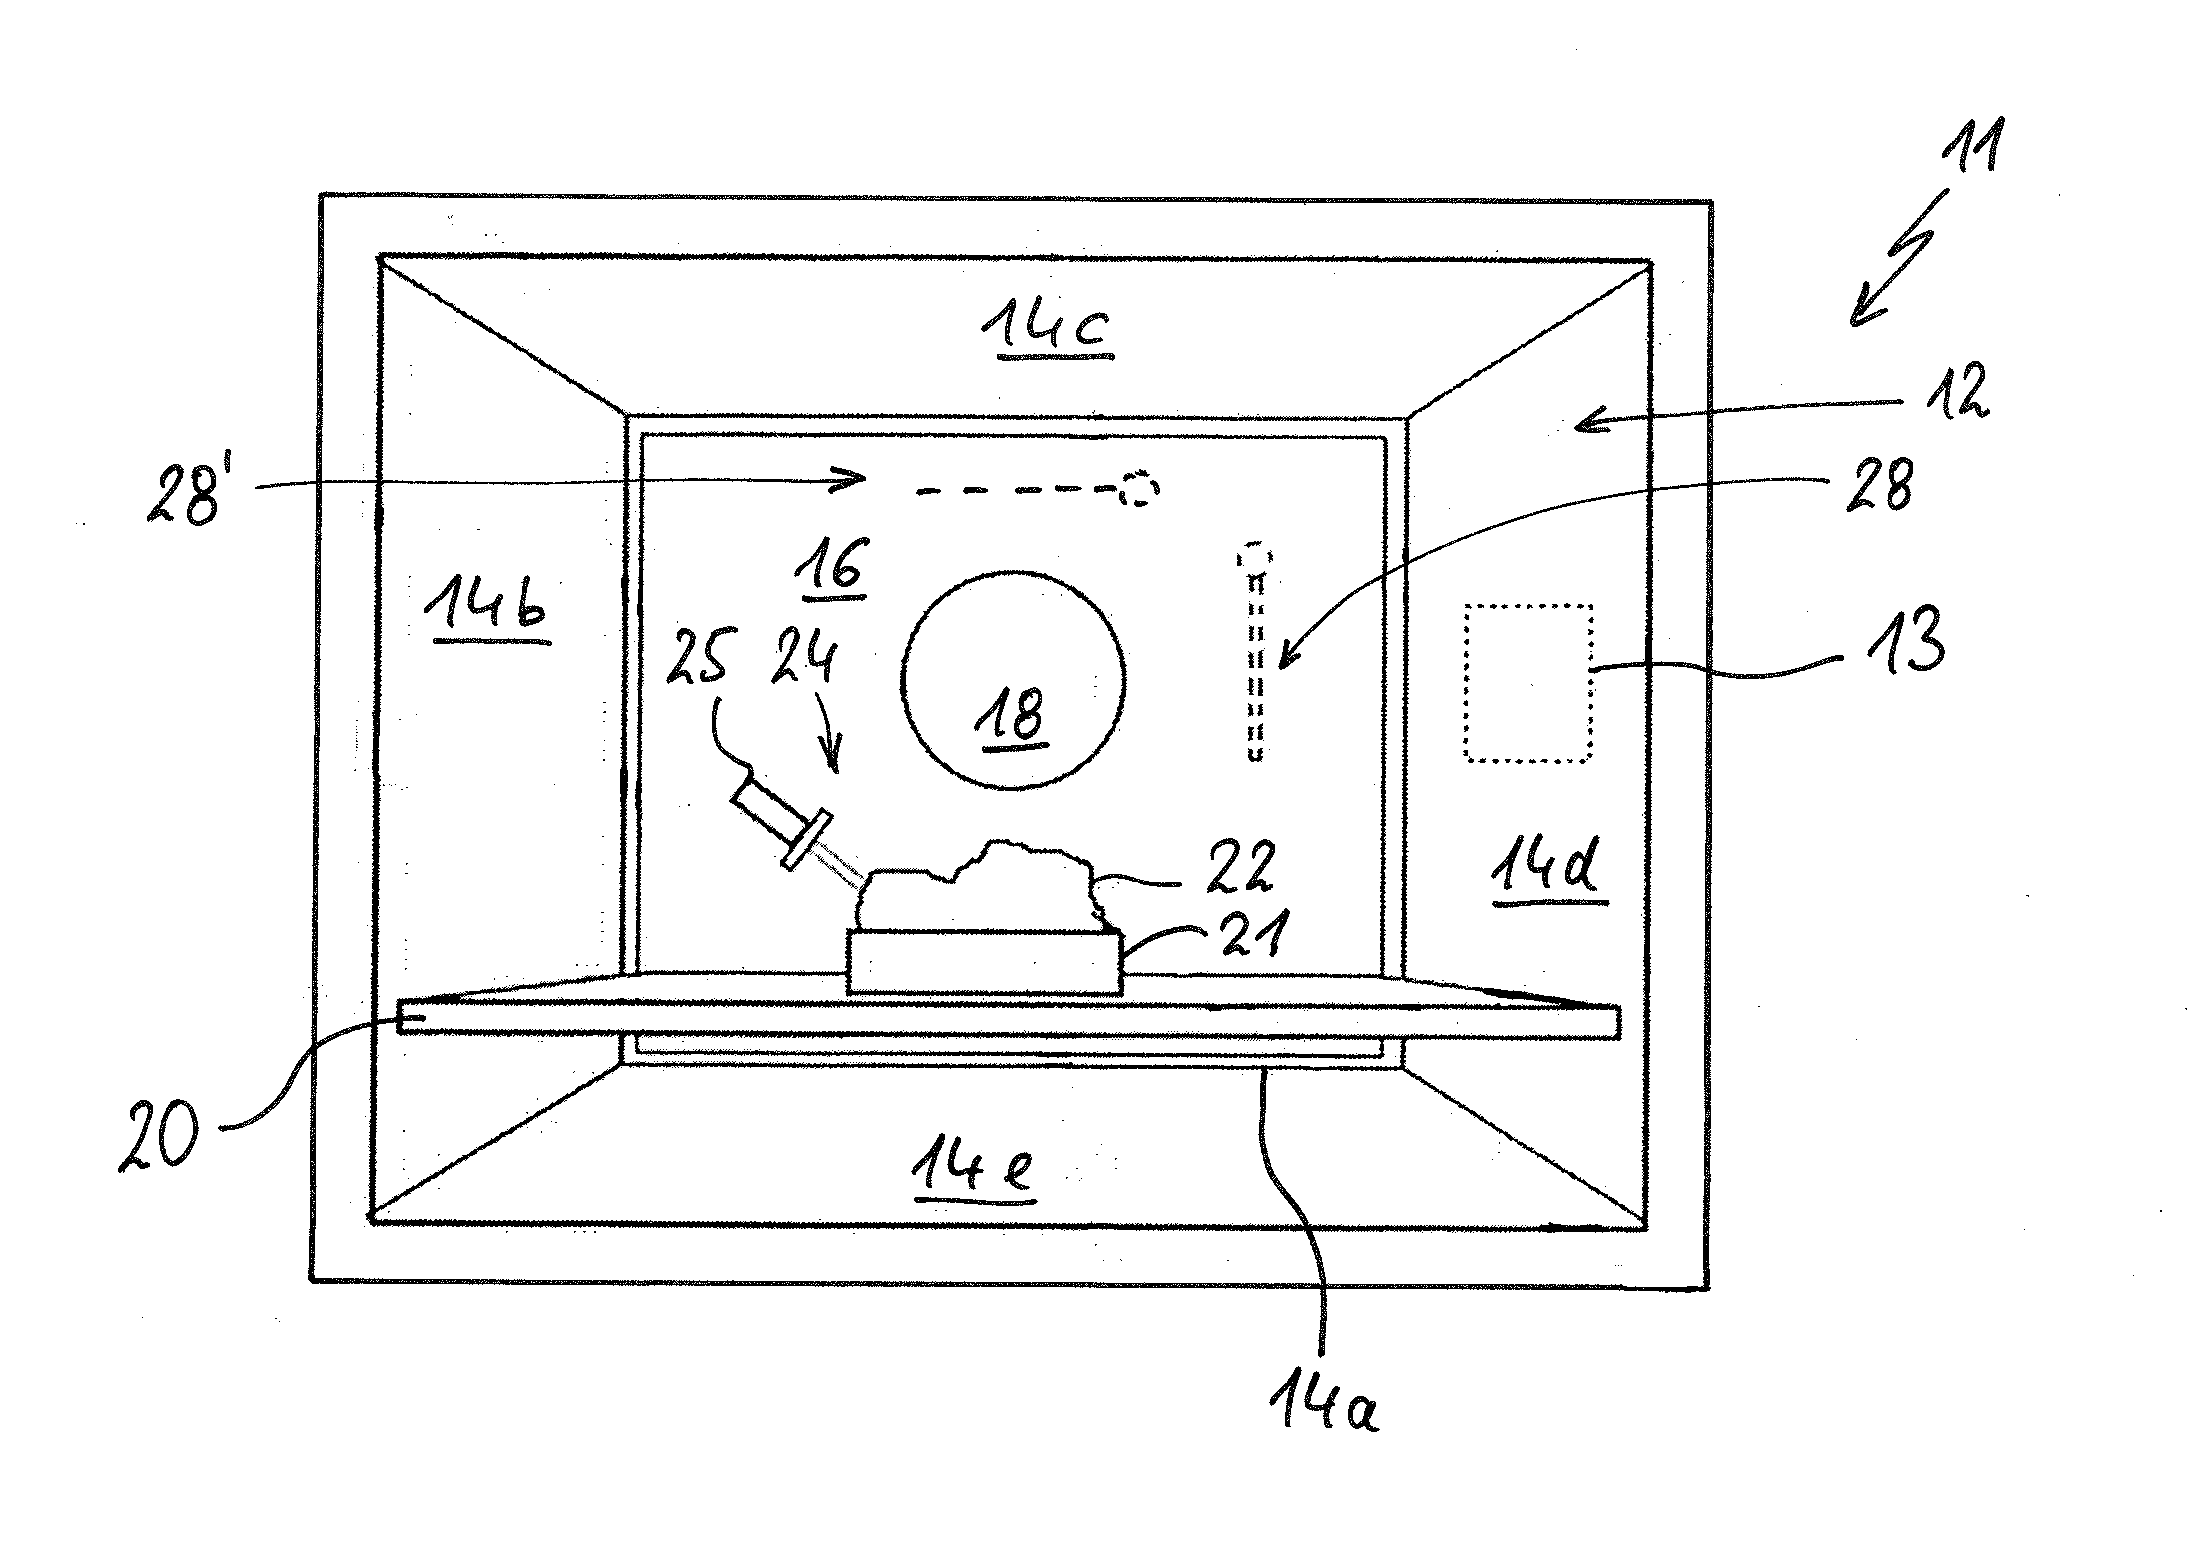 Methods and apparatuses for a cooking device